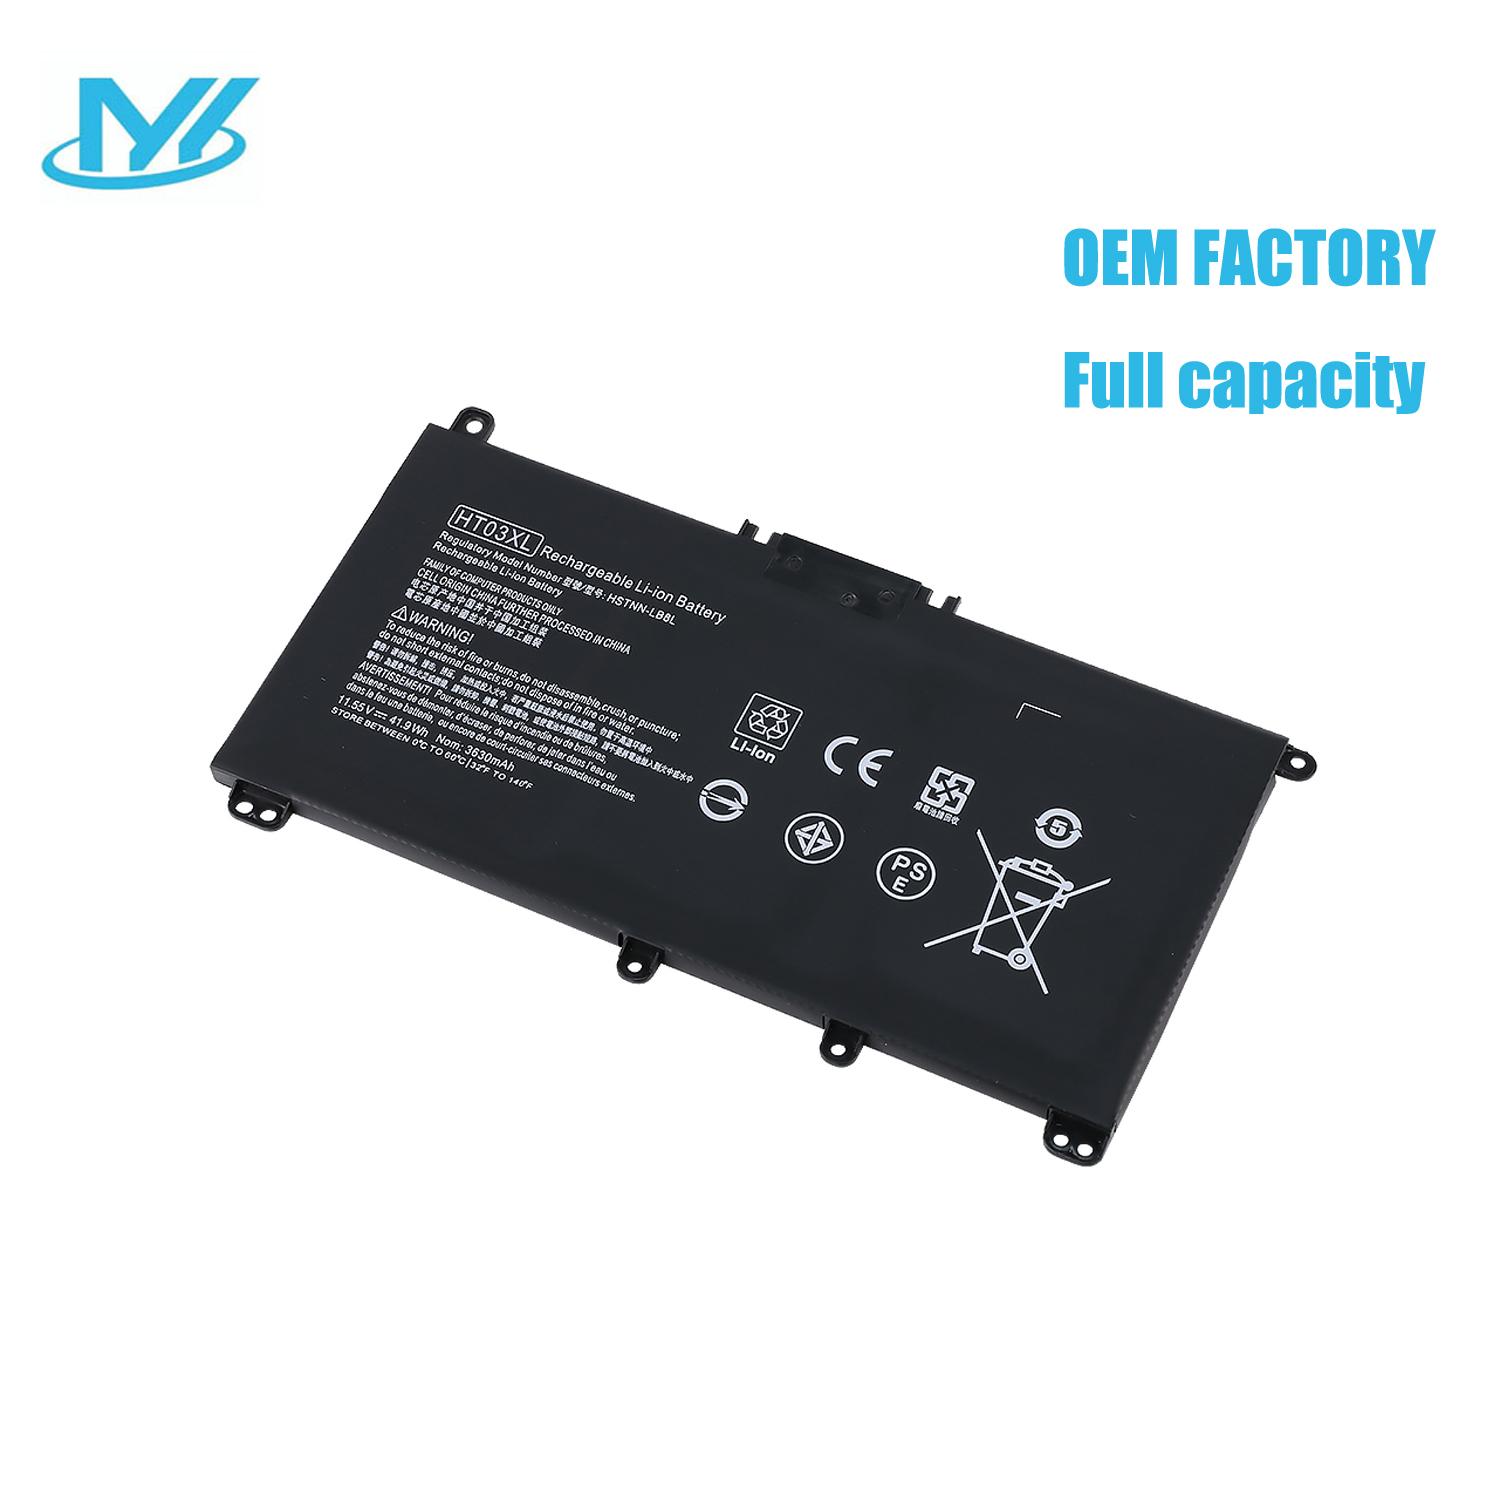 HT03XL rechargeable lithium ion Notebook battery Laptop battery 11.5V 41Wh TF03XL HSTNN-IB7Y HSTNN-LB7X HSTNN-LB7J HSTNN-UB7J for HP laptop 240 G7 /245 G7/ 250 G7/ 255 G7/ 340 G5/ 348 G5